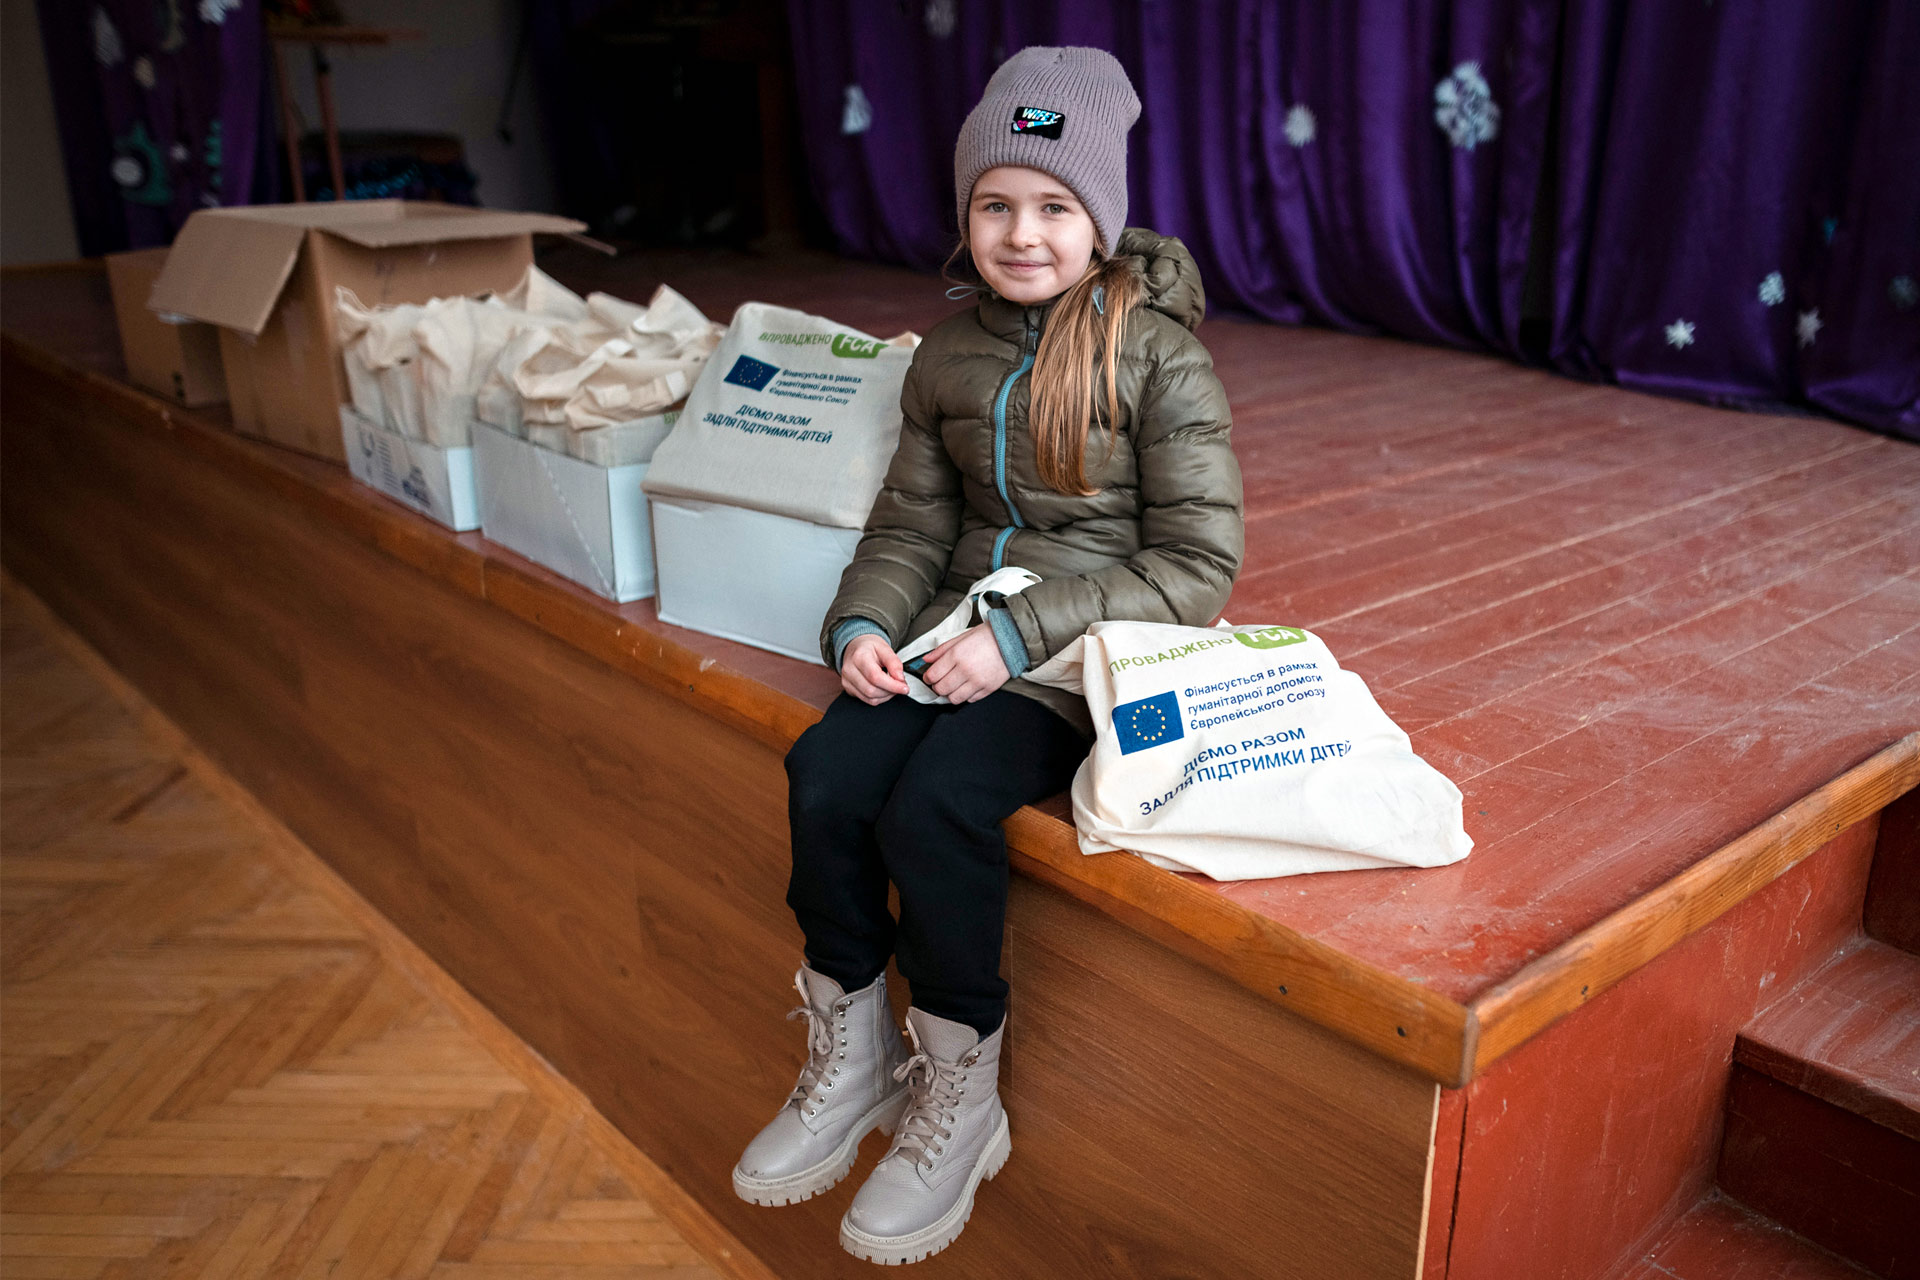 A girl sits on a school stage next to bags full of books that bear the logos of FCA and the EU